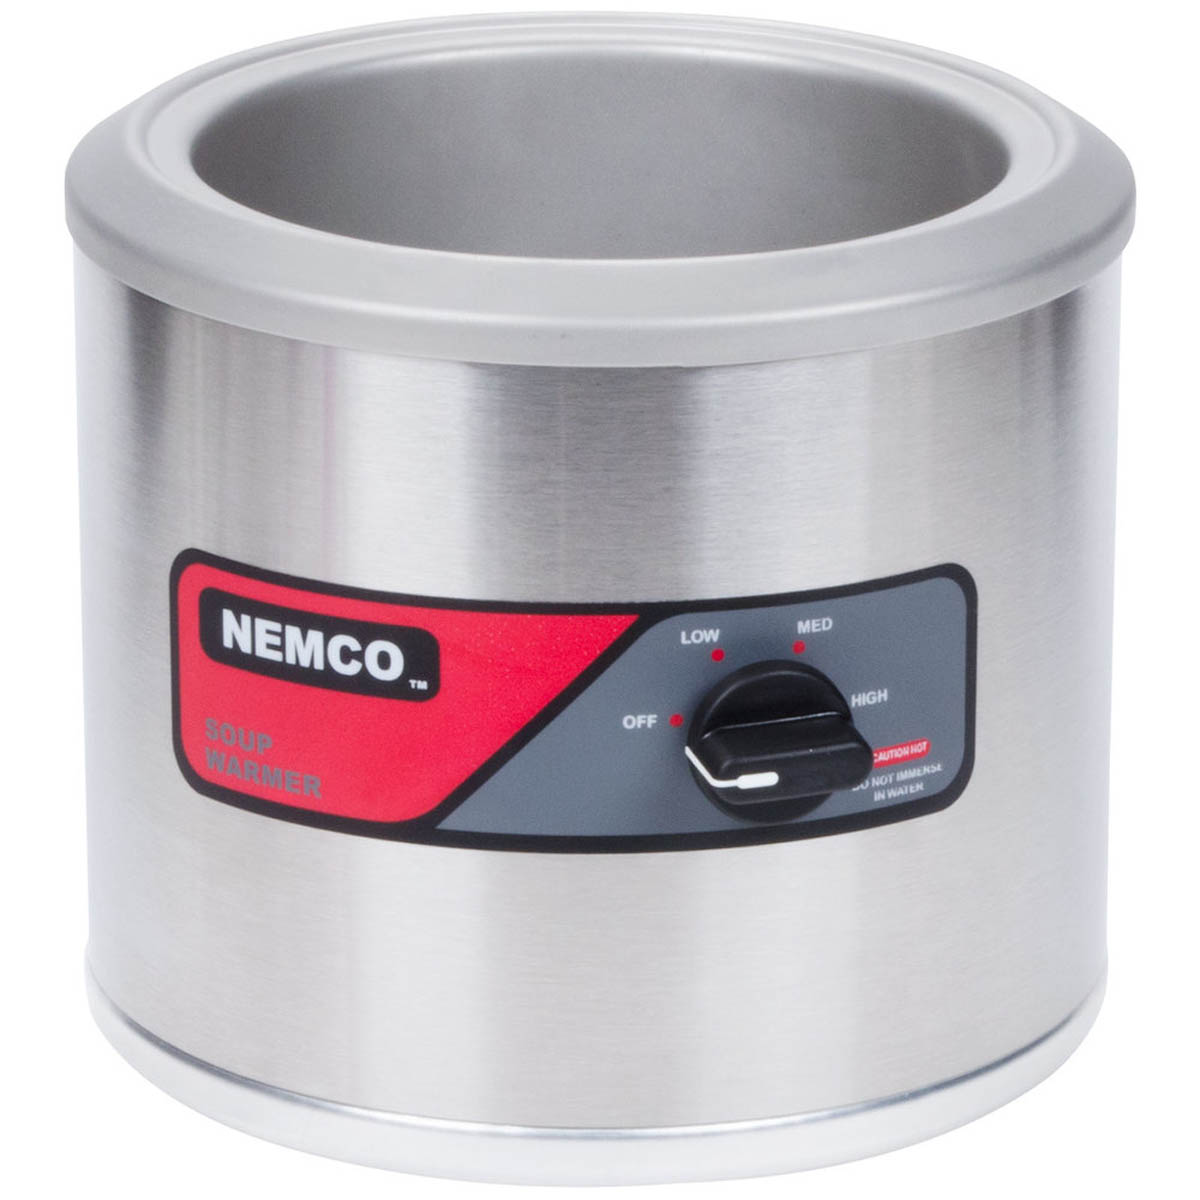 Nemco 6100A Countertop Food Pan Warmer w/ 7-Qt. Capacity, Adjustable Thermostat, 1 Well